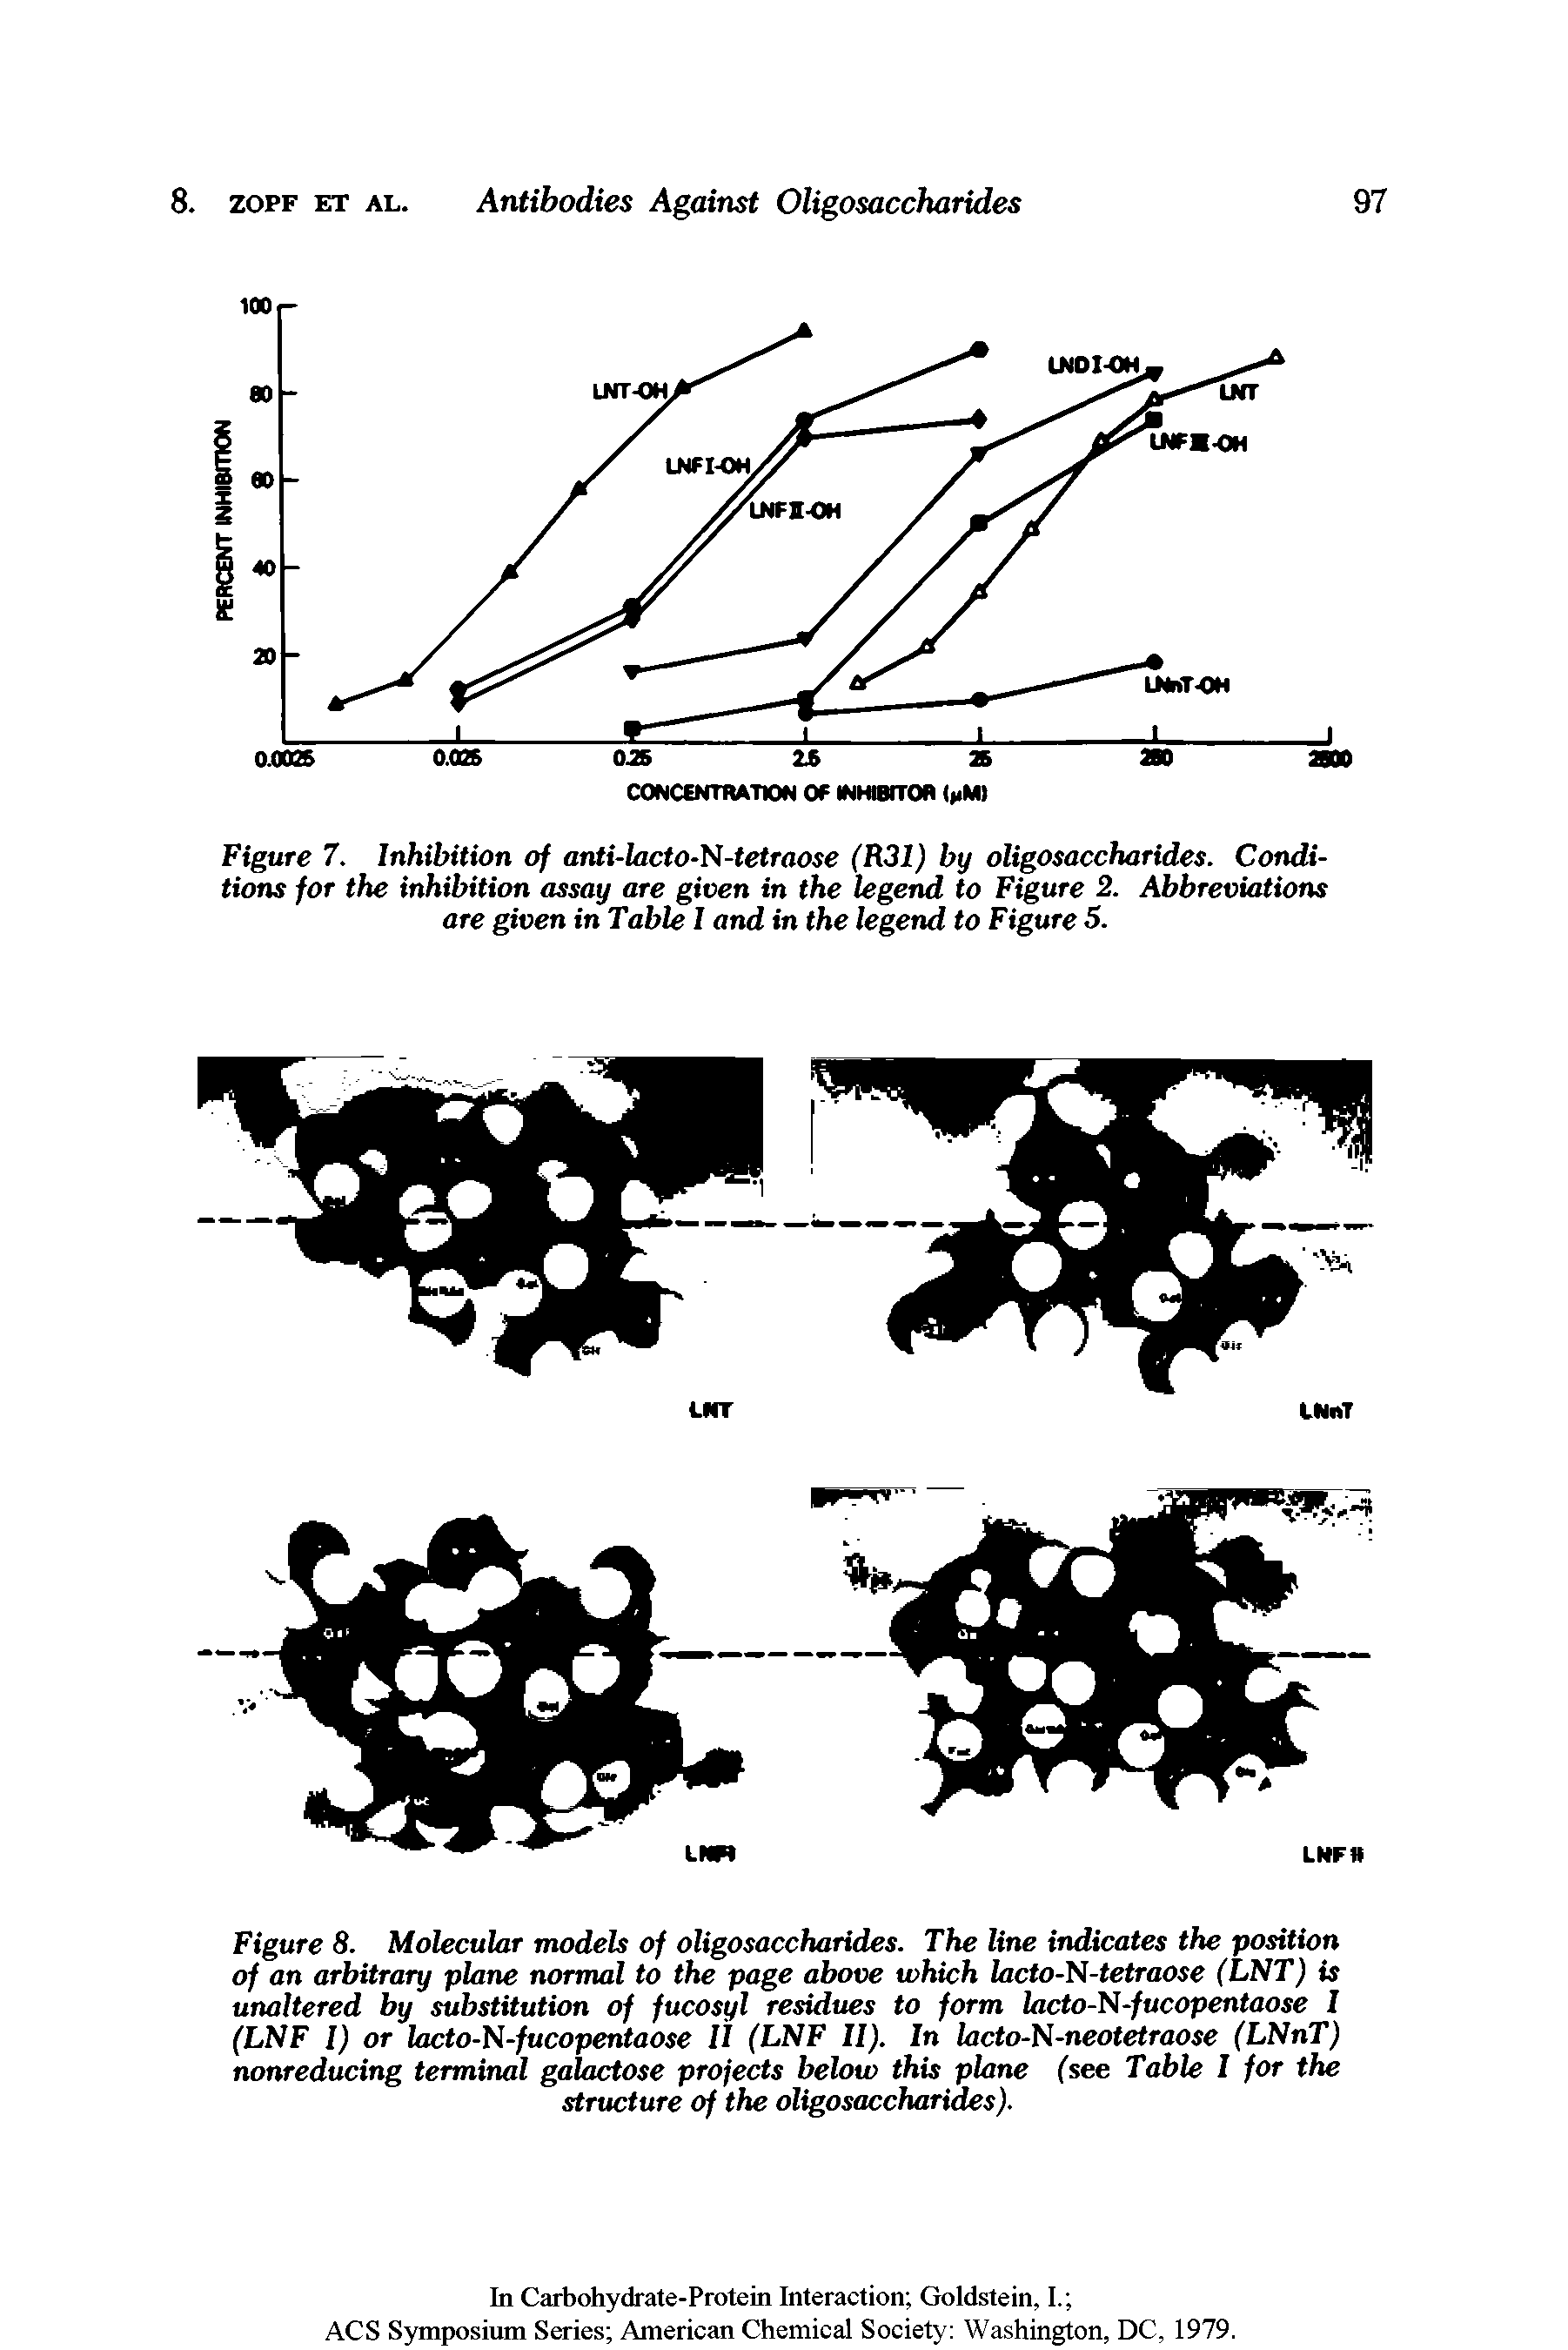 Figure 8. Molecular models of oligosaccharides. The line indicates the position of an arbitrary plane normal to the page above which lacto-N-tetraose (LNT) is unaltered by substitution of fucosyl residues to form lacto-N-fucopentaose I (LNF I) or lacto-N-fucopentaose II (LNF II). In lacto-N-neotetraose (LNnT) nonreducing terminal galactose projects below this plane (see Table I for the structure of the oligosaccharides).